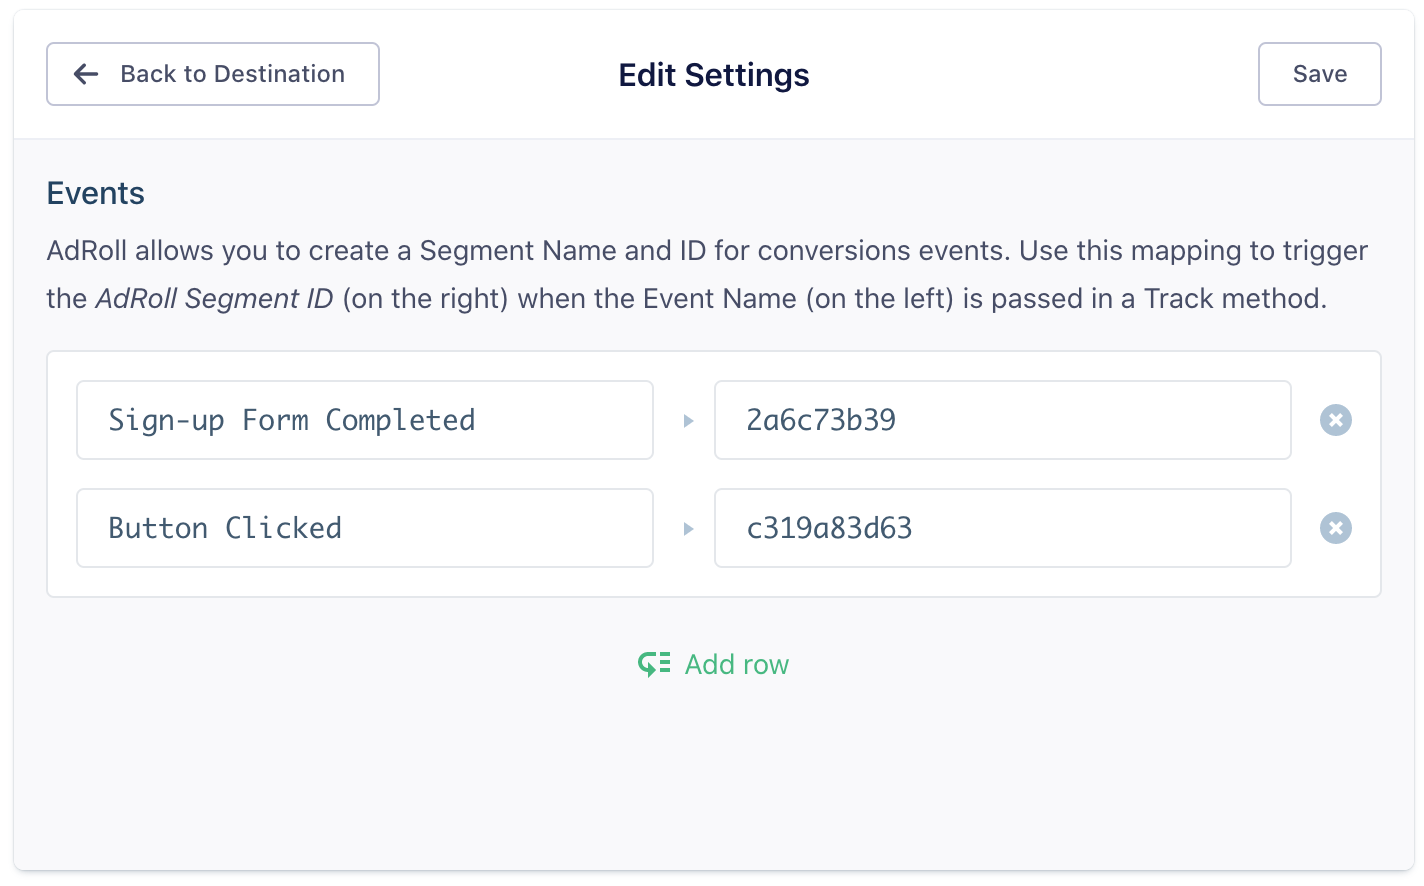 A screenshot of the Events settings in the Adroll destination settings within Segment, with two custom events, Sign-up Form Completed and Button Clicked.